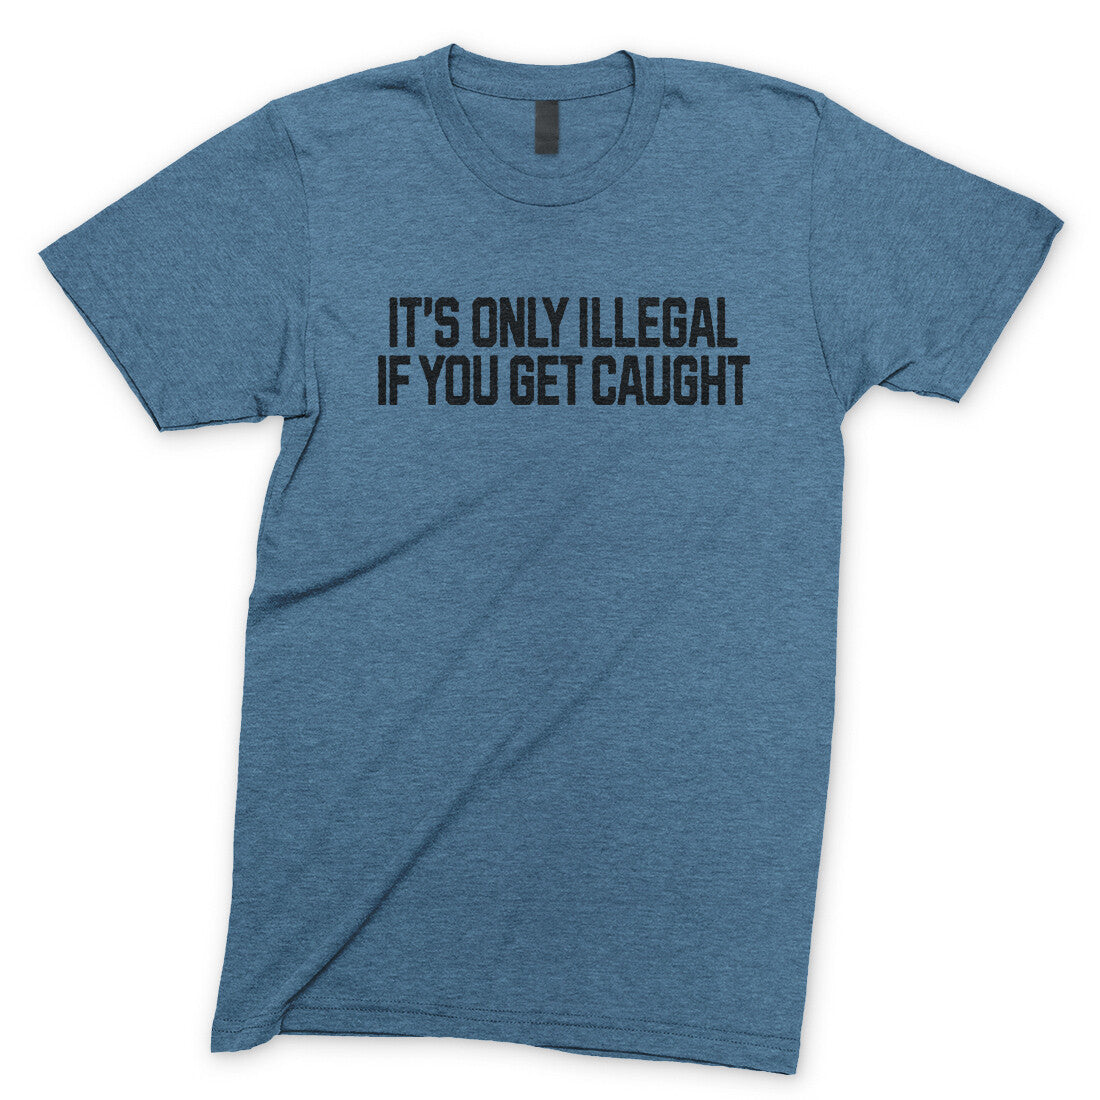 It’s Only Illegal If You Get Caught in Heather Indigo Color